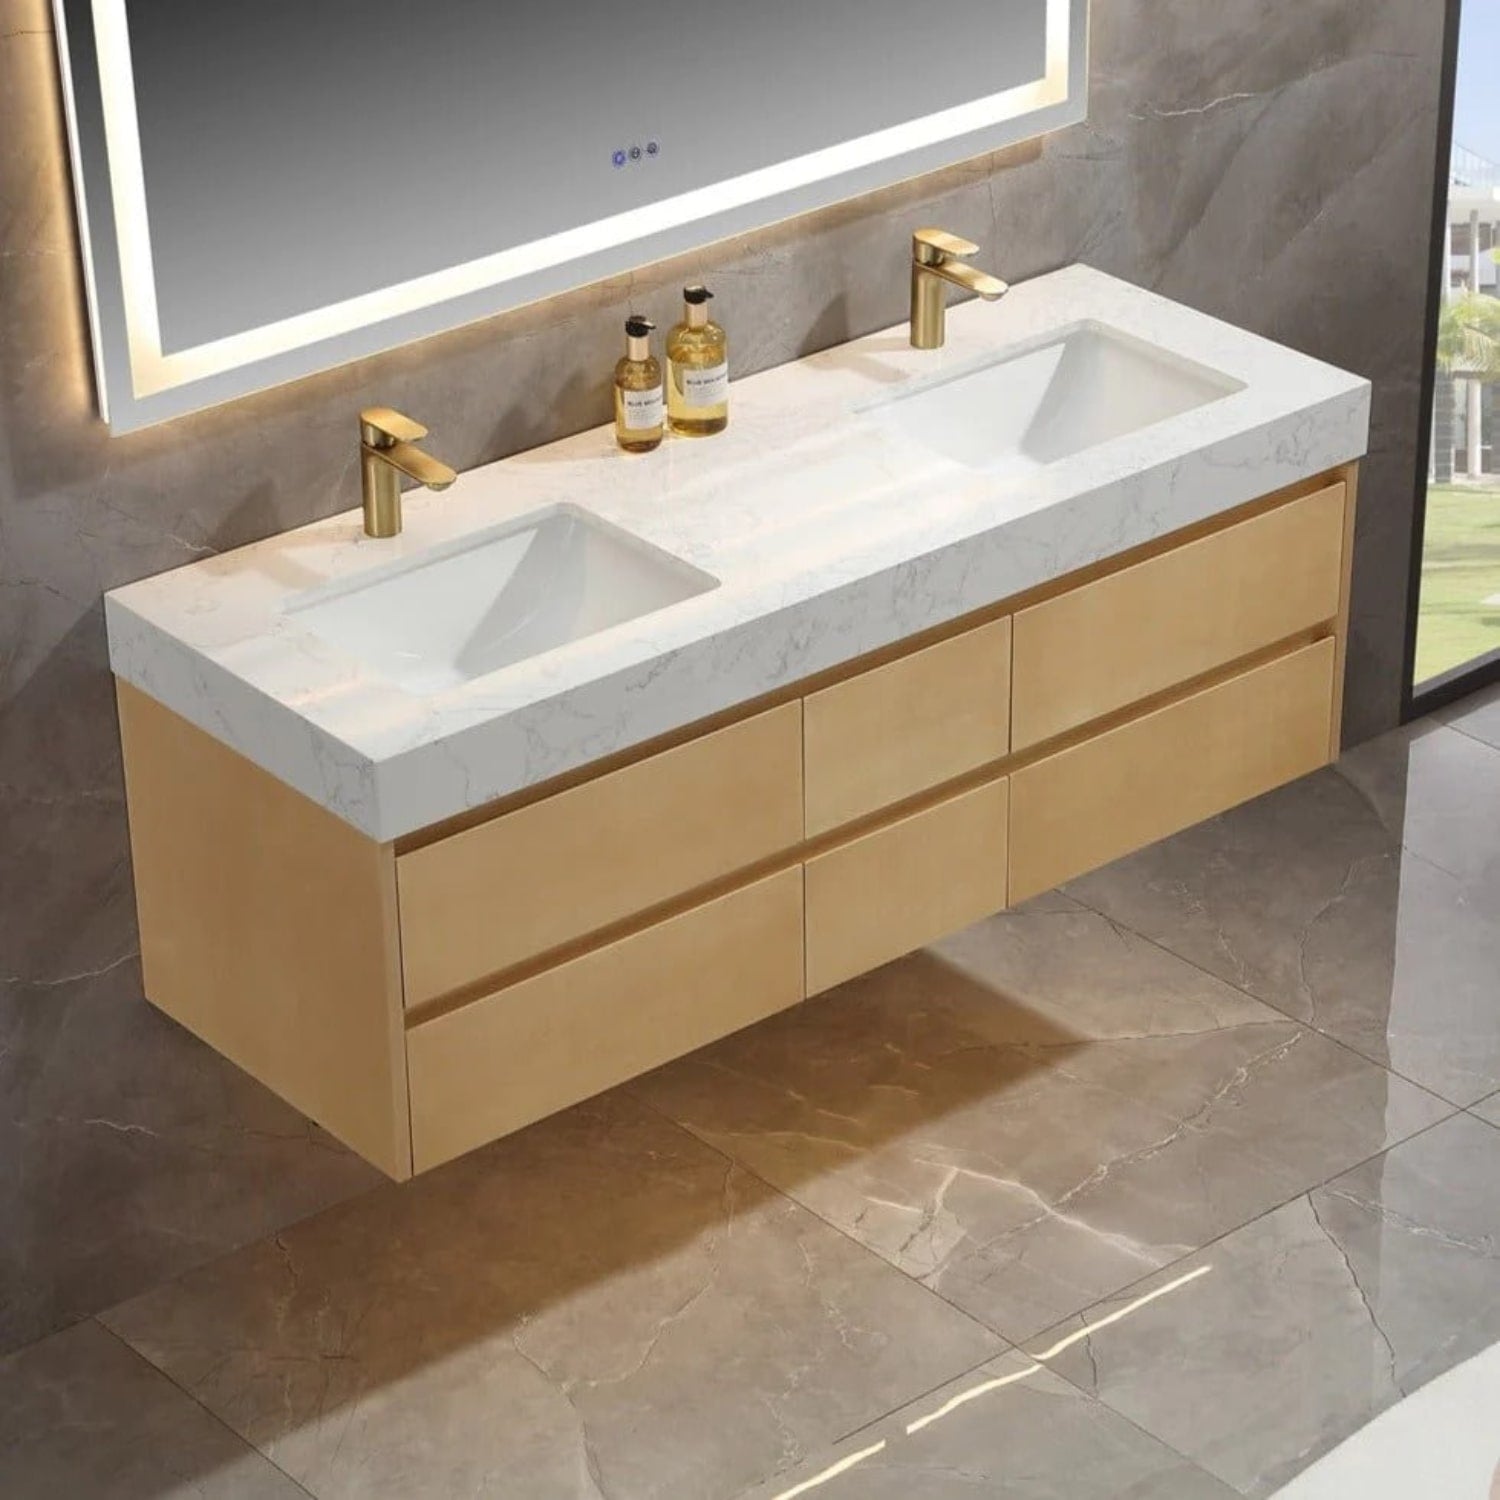 The article that will help you choose your luxury bathroom vanity